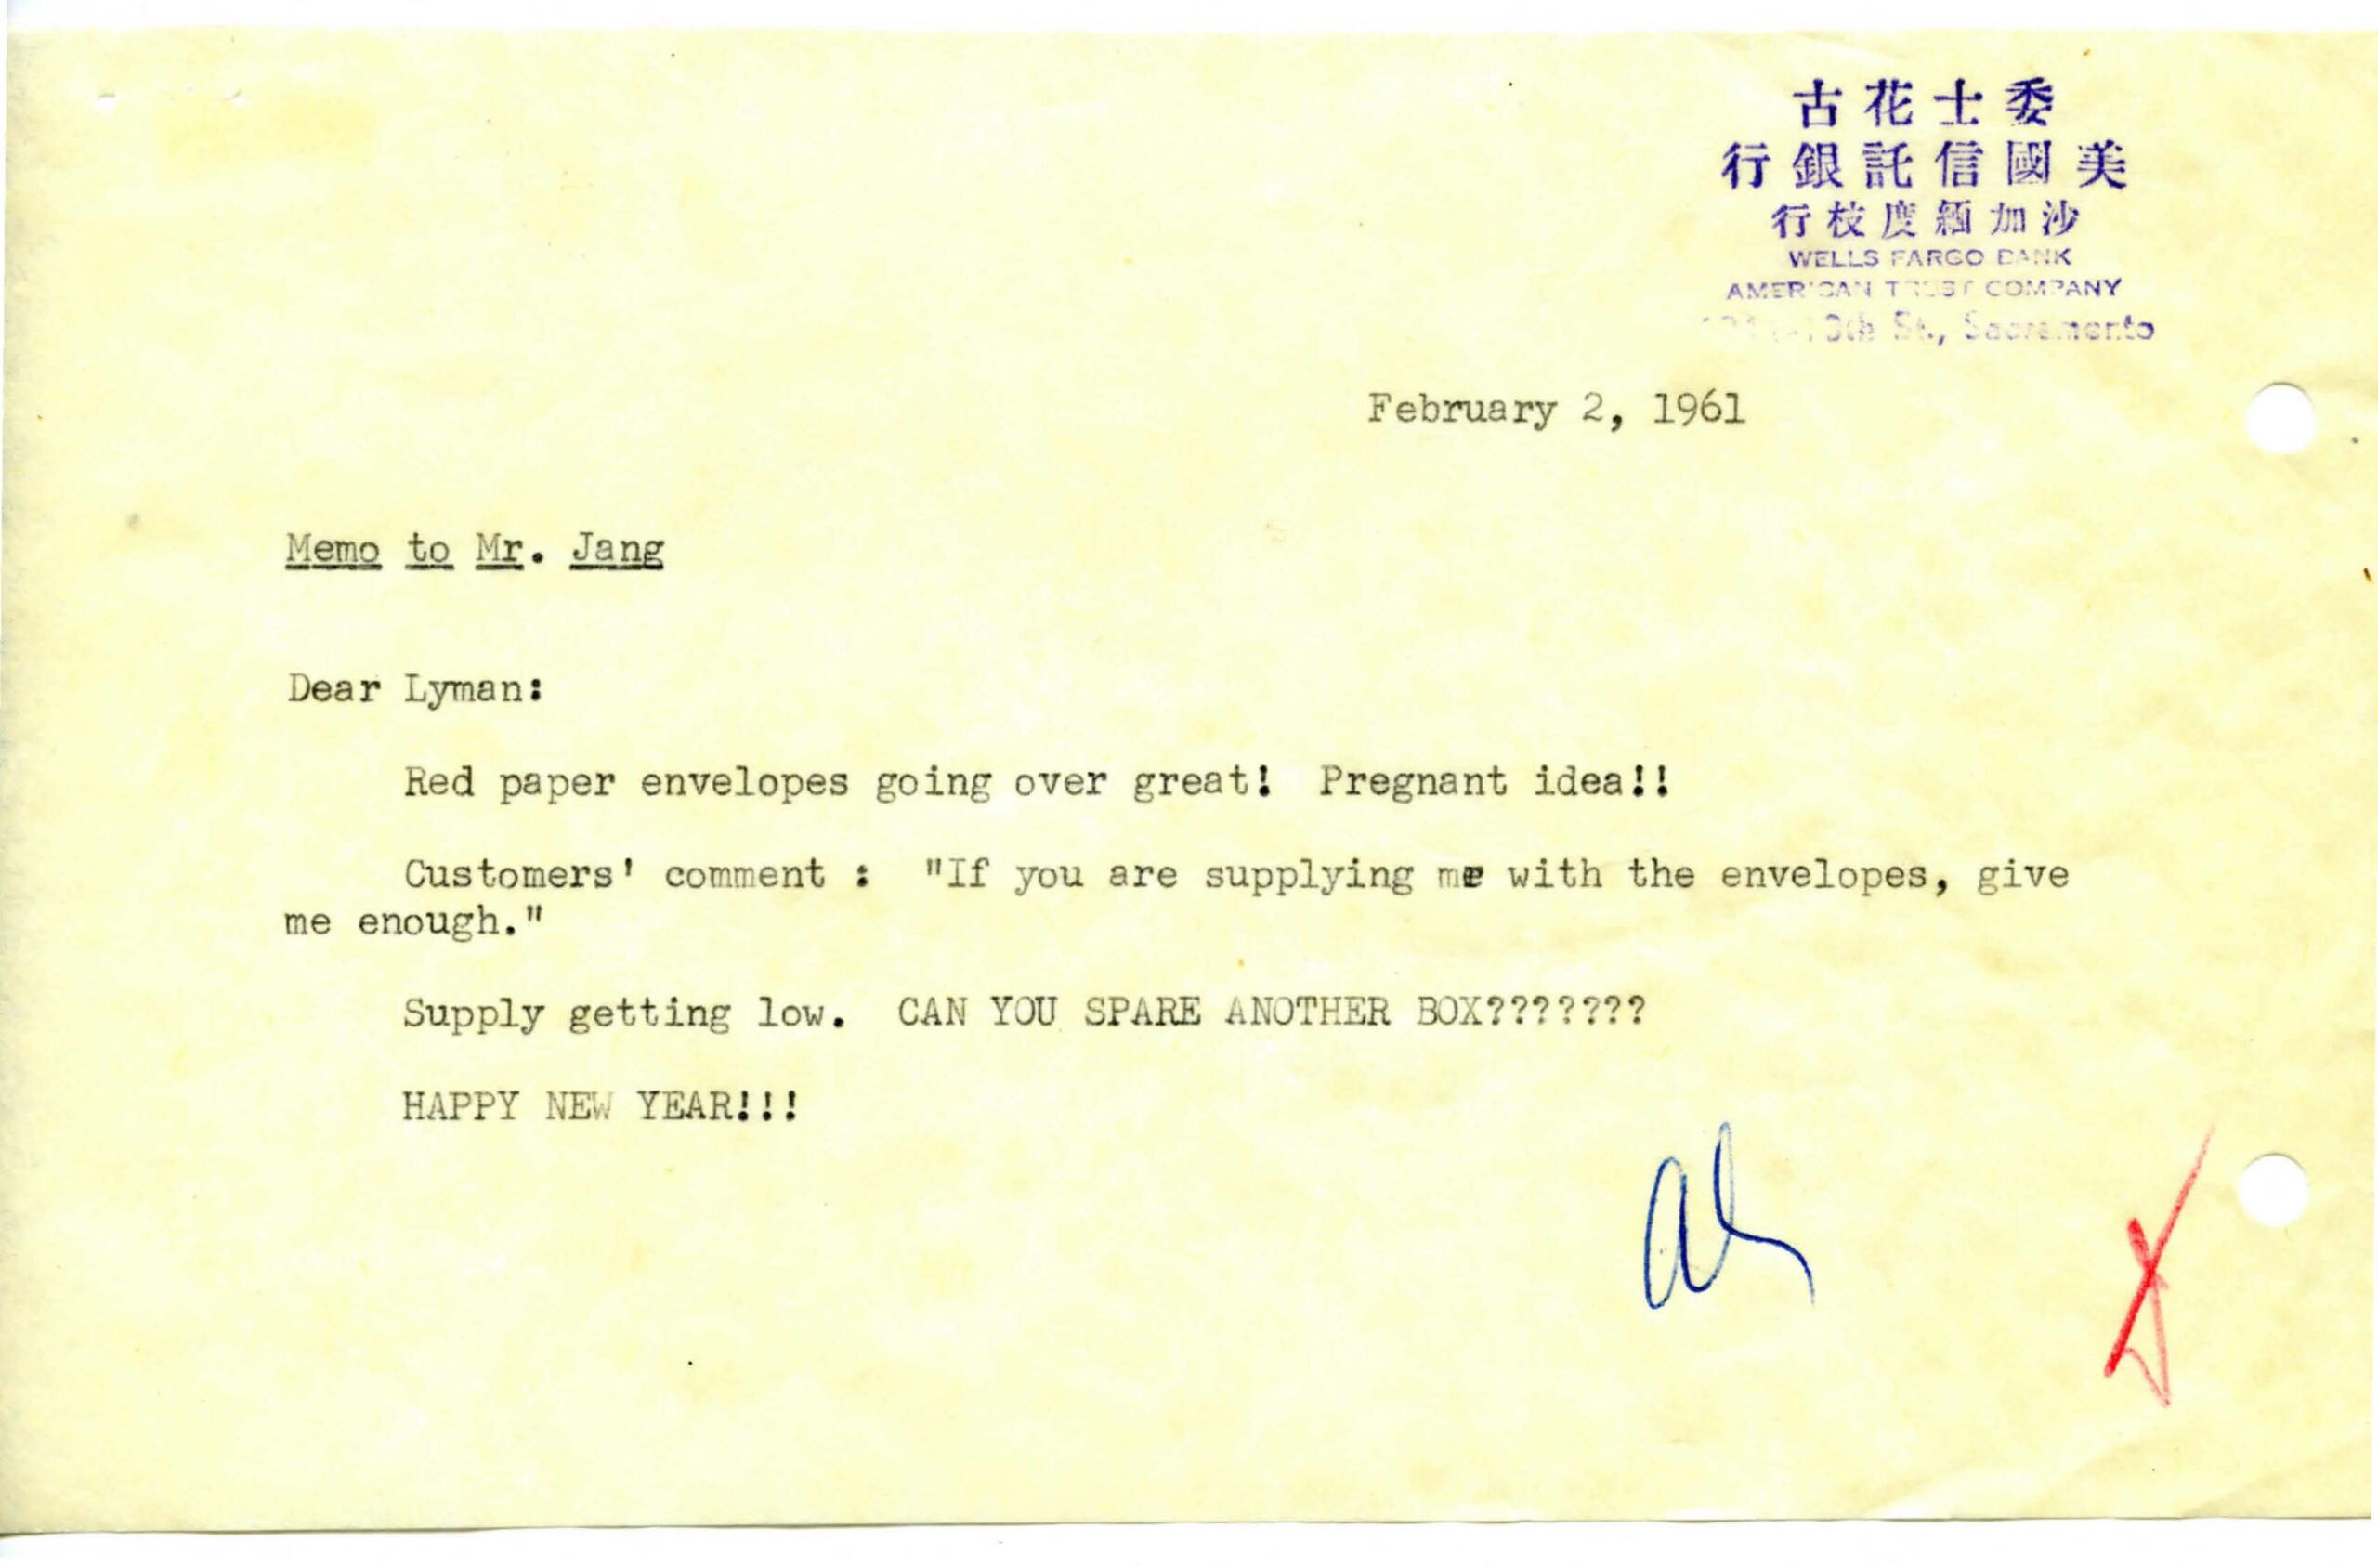 A yellow paper with a typewritten memo in black ink dated February 2, 1961. It reads: Memo to Mr. Jang Dear Lyman, red paper envelopes going over great. Pregnant idea!! Customers comment: “{If you are supplying me with the envelopes give me enough.” Supply is getting low. Can you spare another box? Happy New Year. Image link will enlarge image.